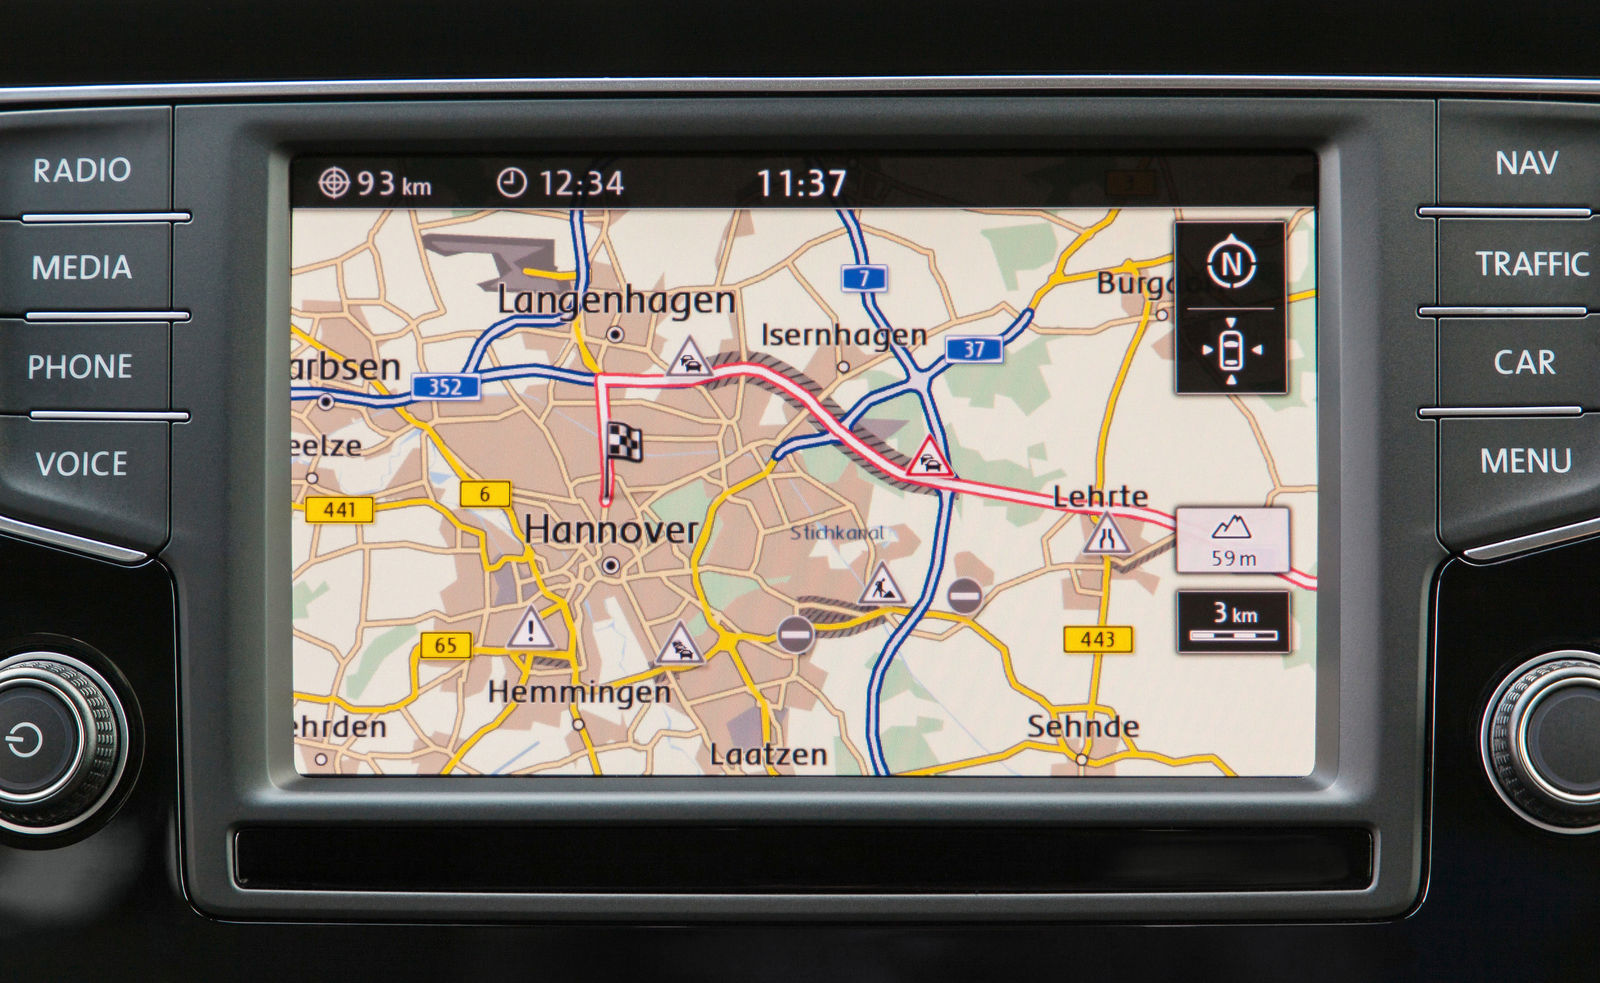 A navigation system that learns: "Regular Routes" makes driving more relaxing